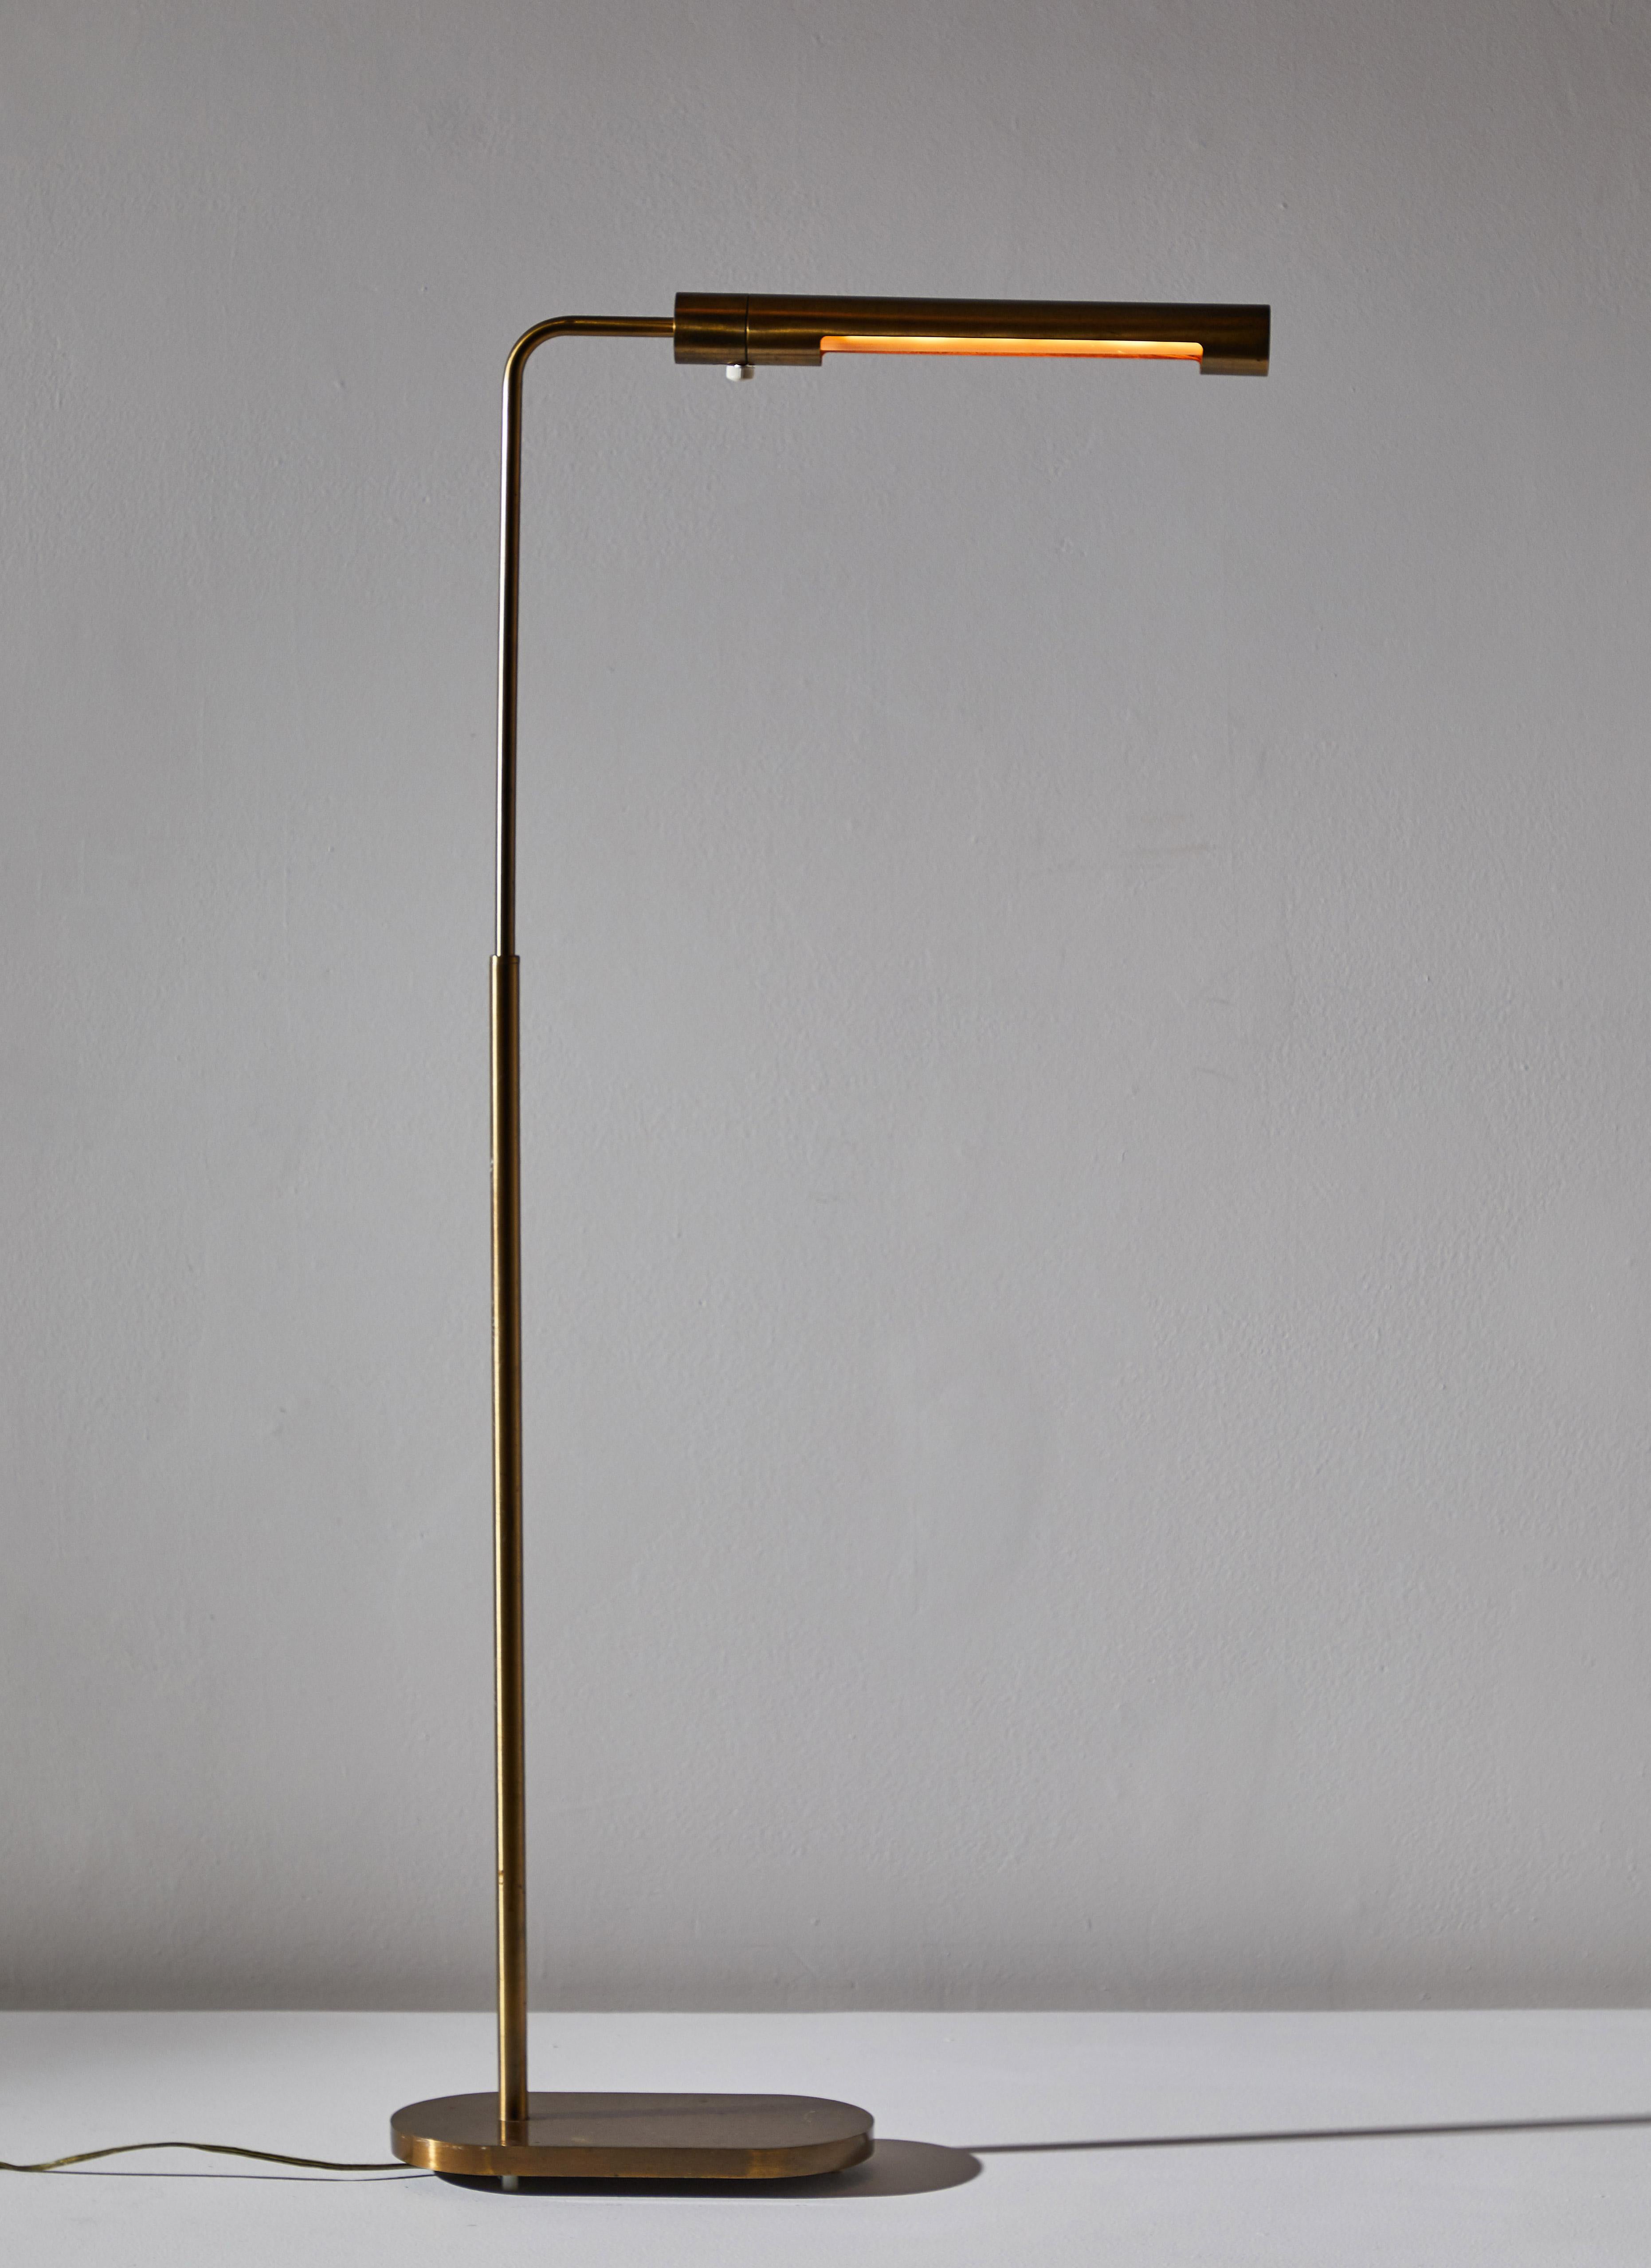 Floor Lamp by Casella. Manufactured in the U.S. circa 1970s. Solid brass with adjustable height. Takes one E26 100w maximum bulb. This model no longer in production. Bulb provided as a one time courtesy.